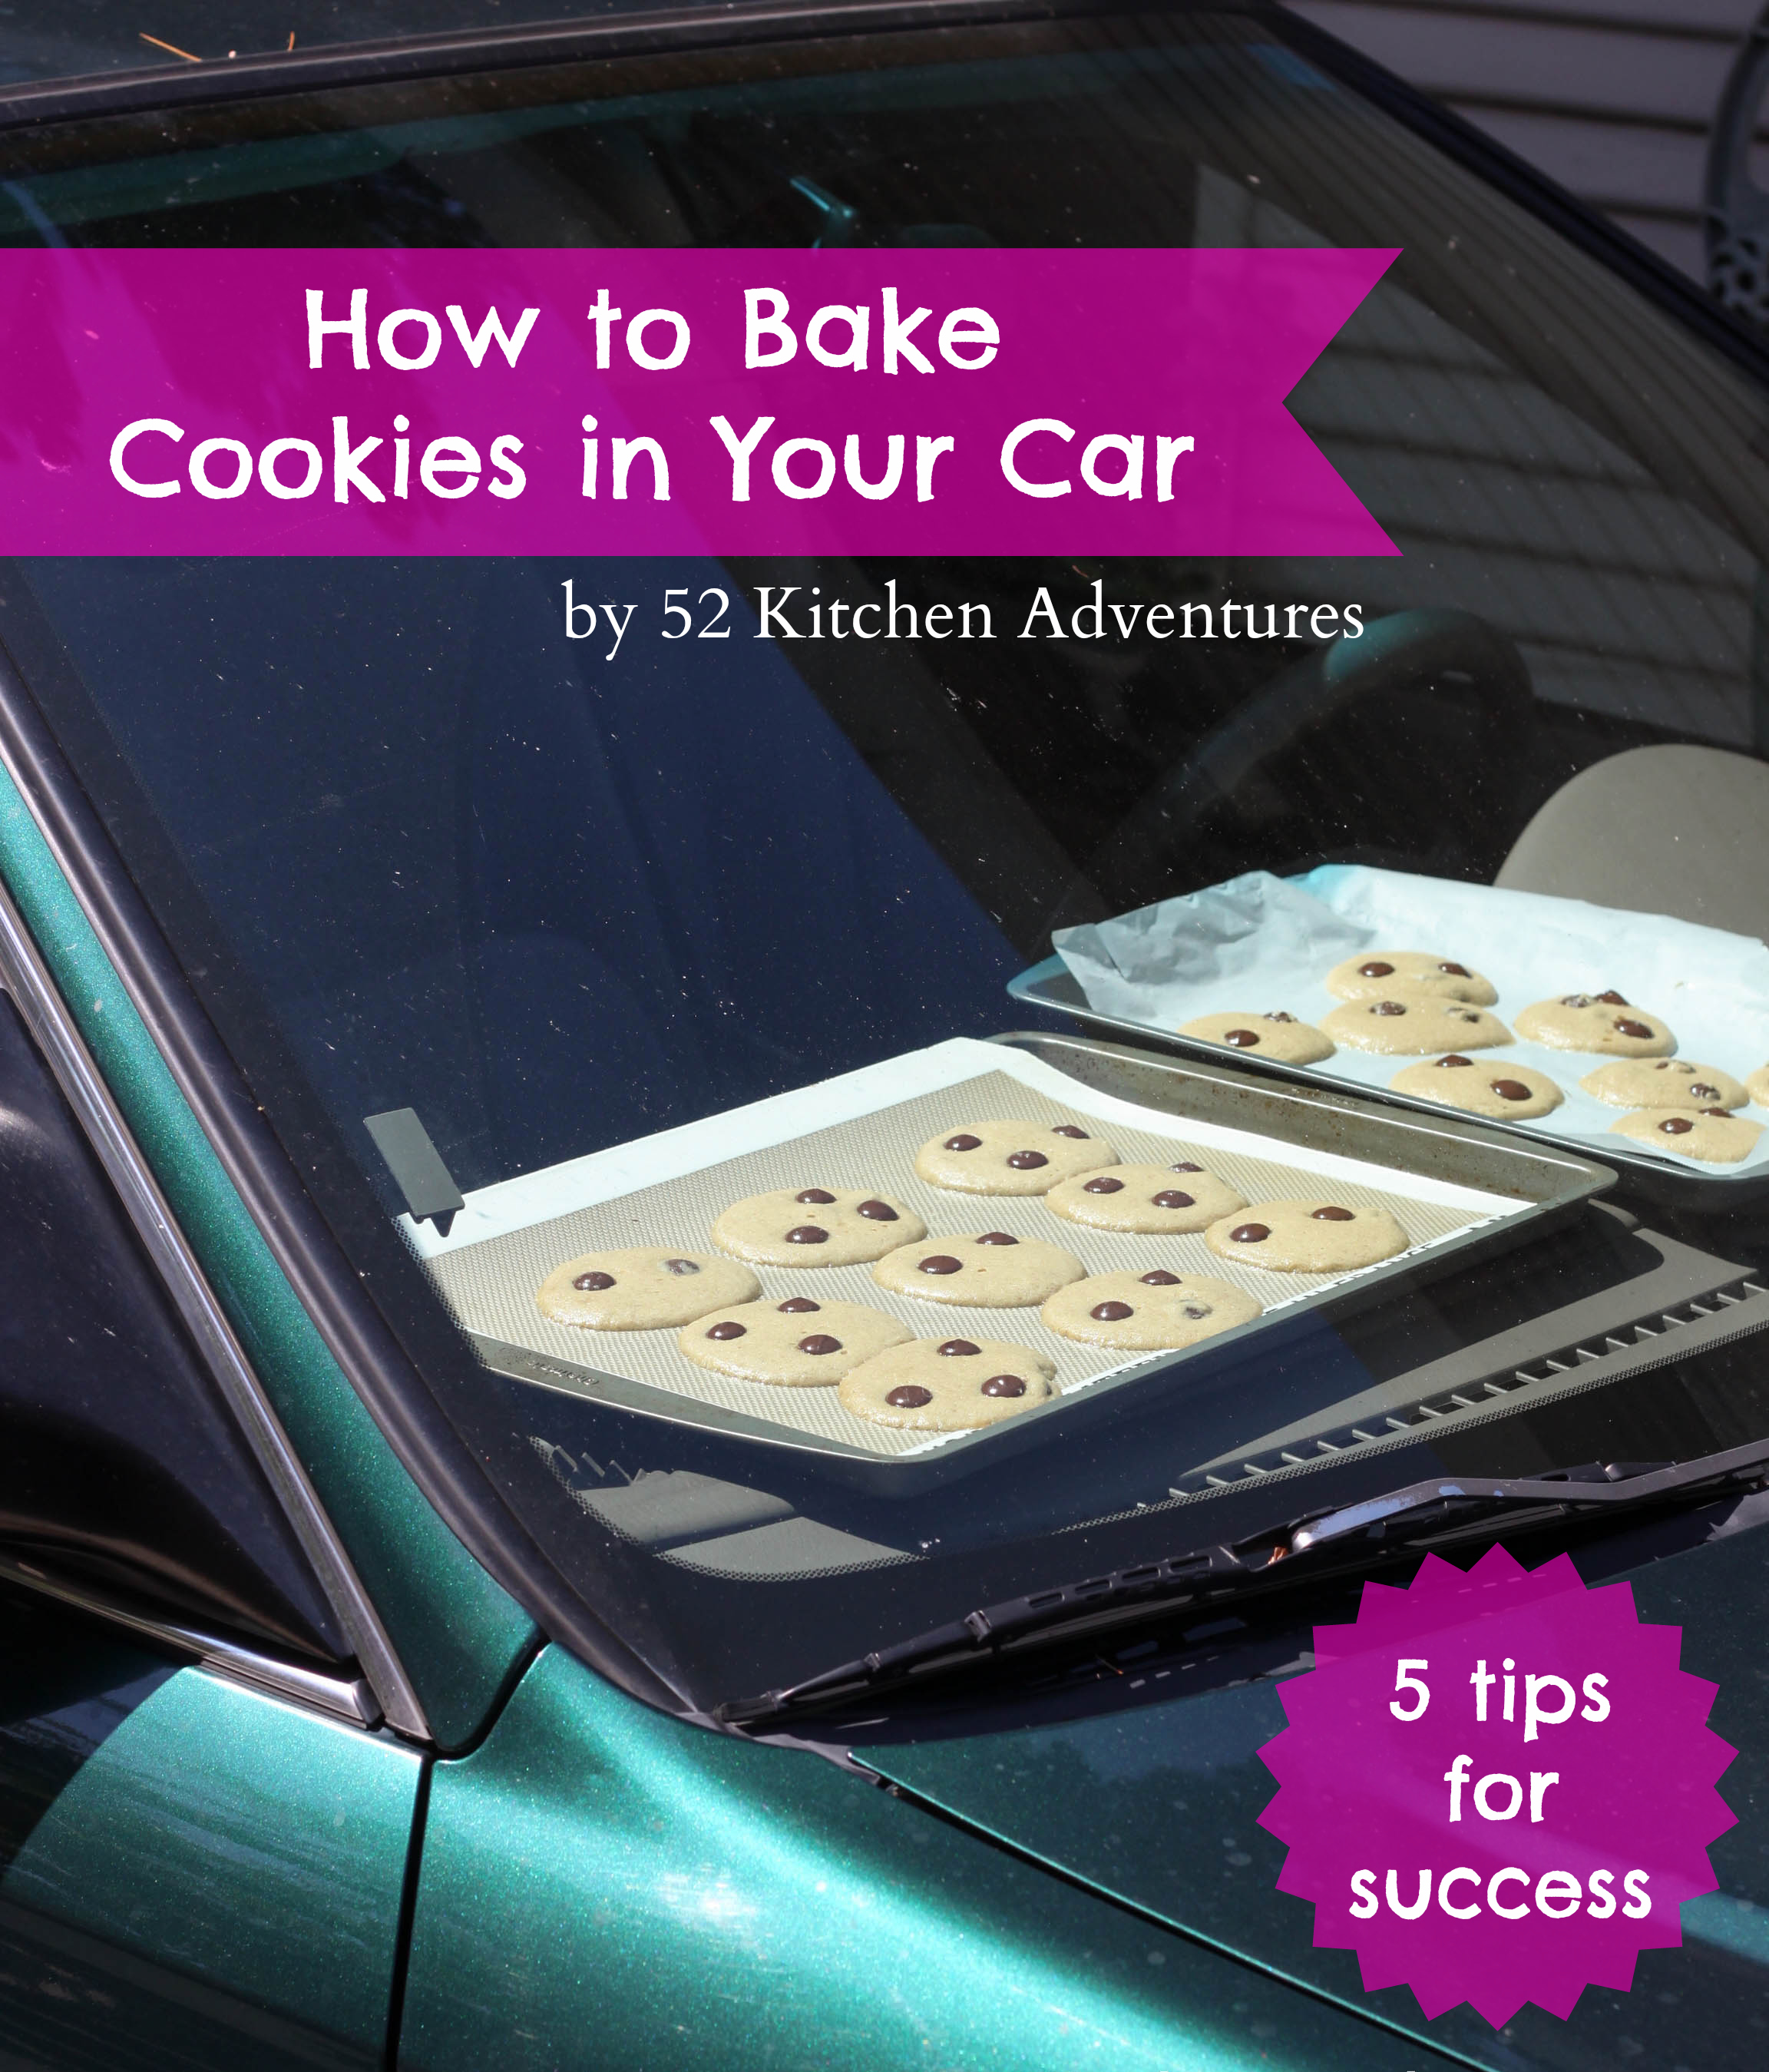 How to bake cookies in your car